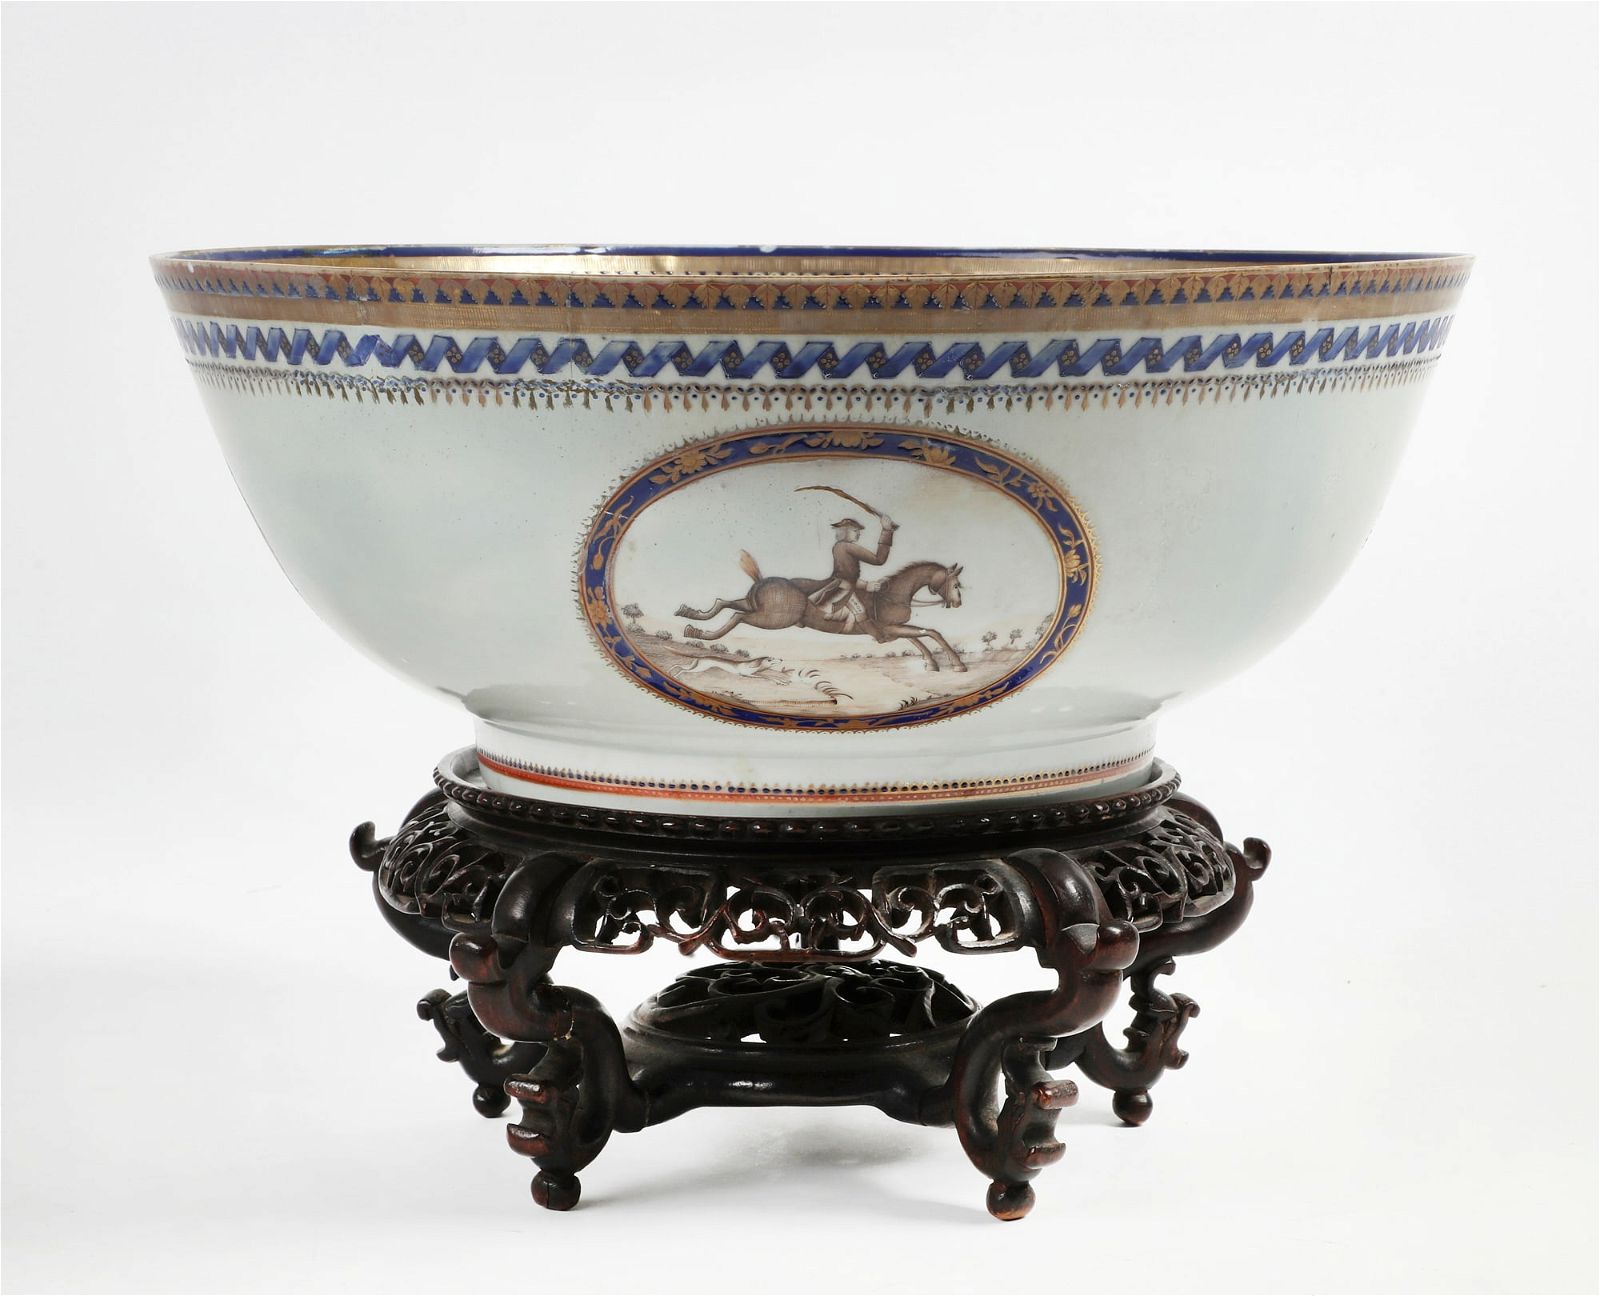 A CHINESE EXPORT PORCELAIN HUNT